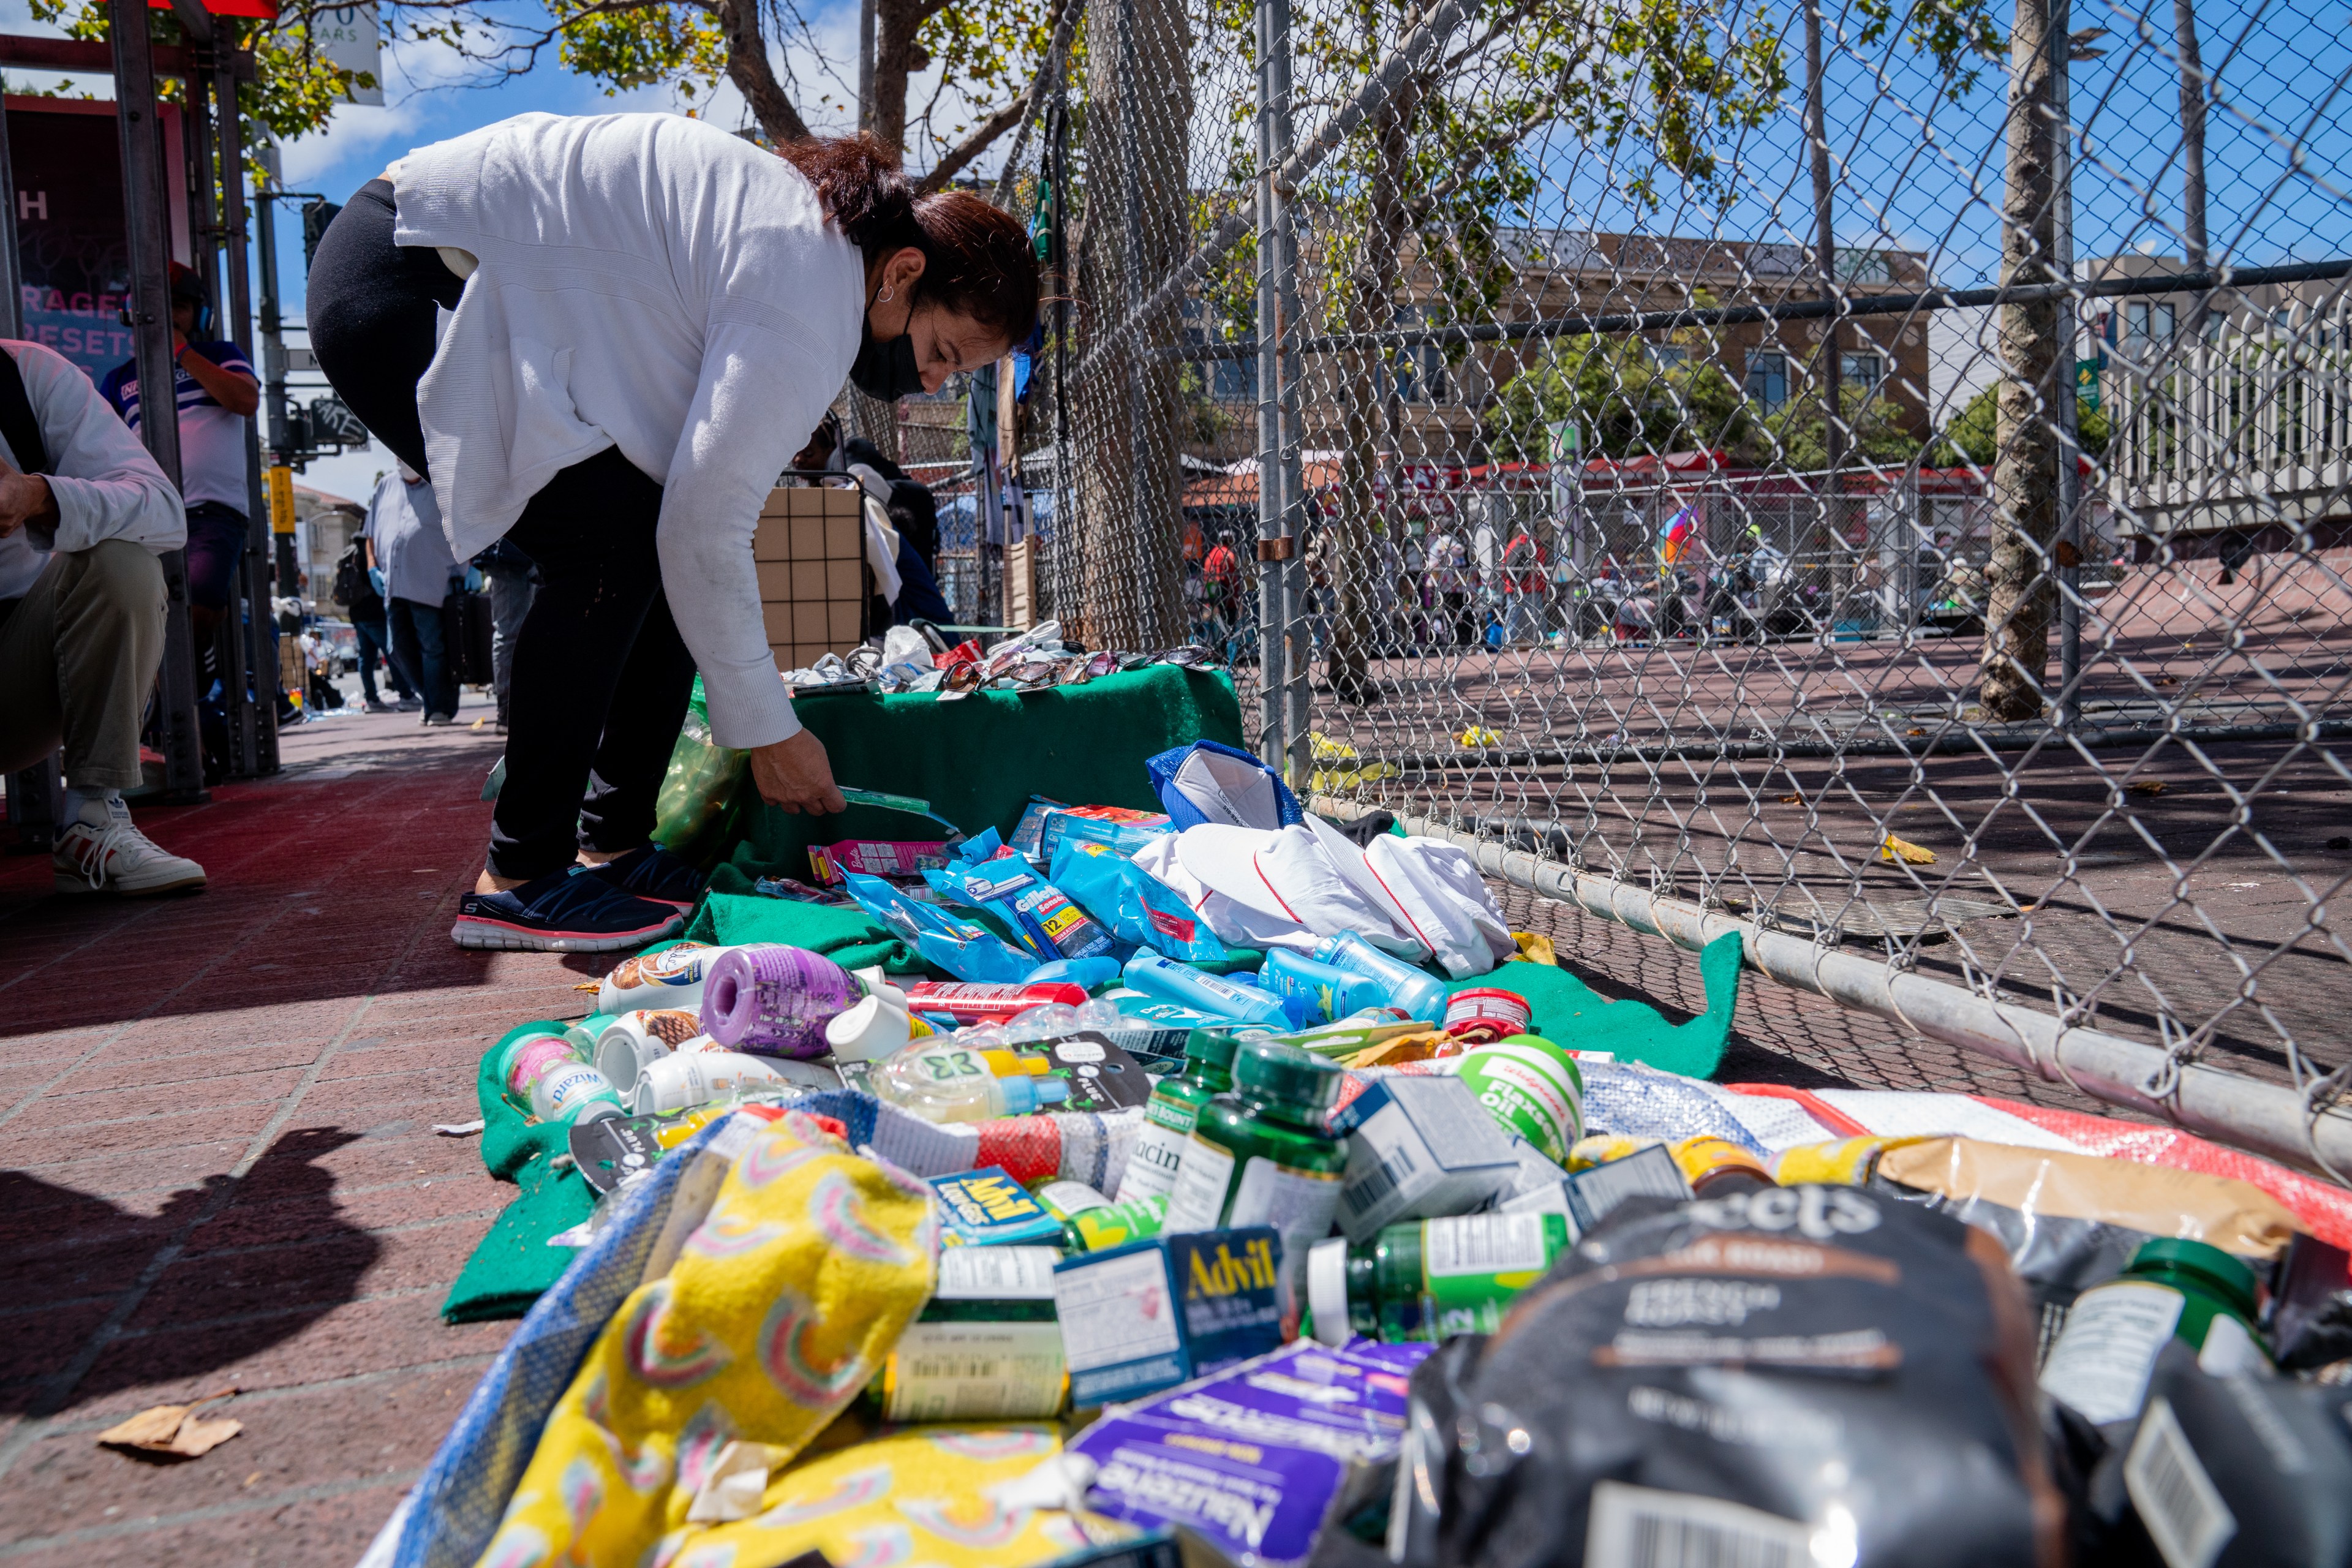 A person is sifting through various items including Advil, coffee, wipes, and laundry detergent along Mission Street in San Francisco, with people walking by in the background.